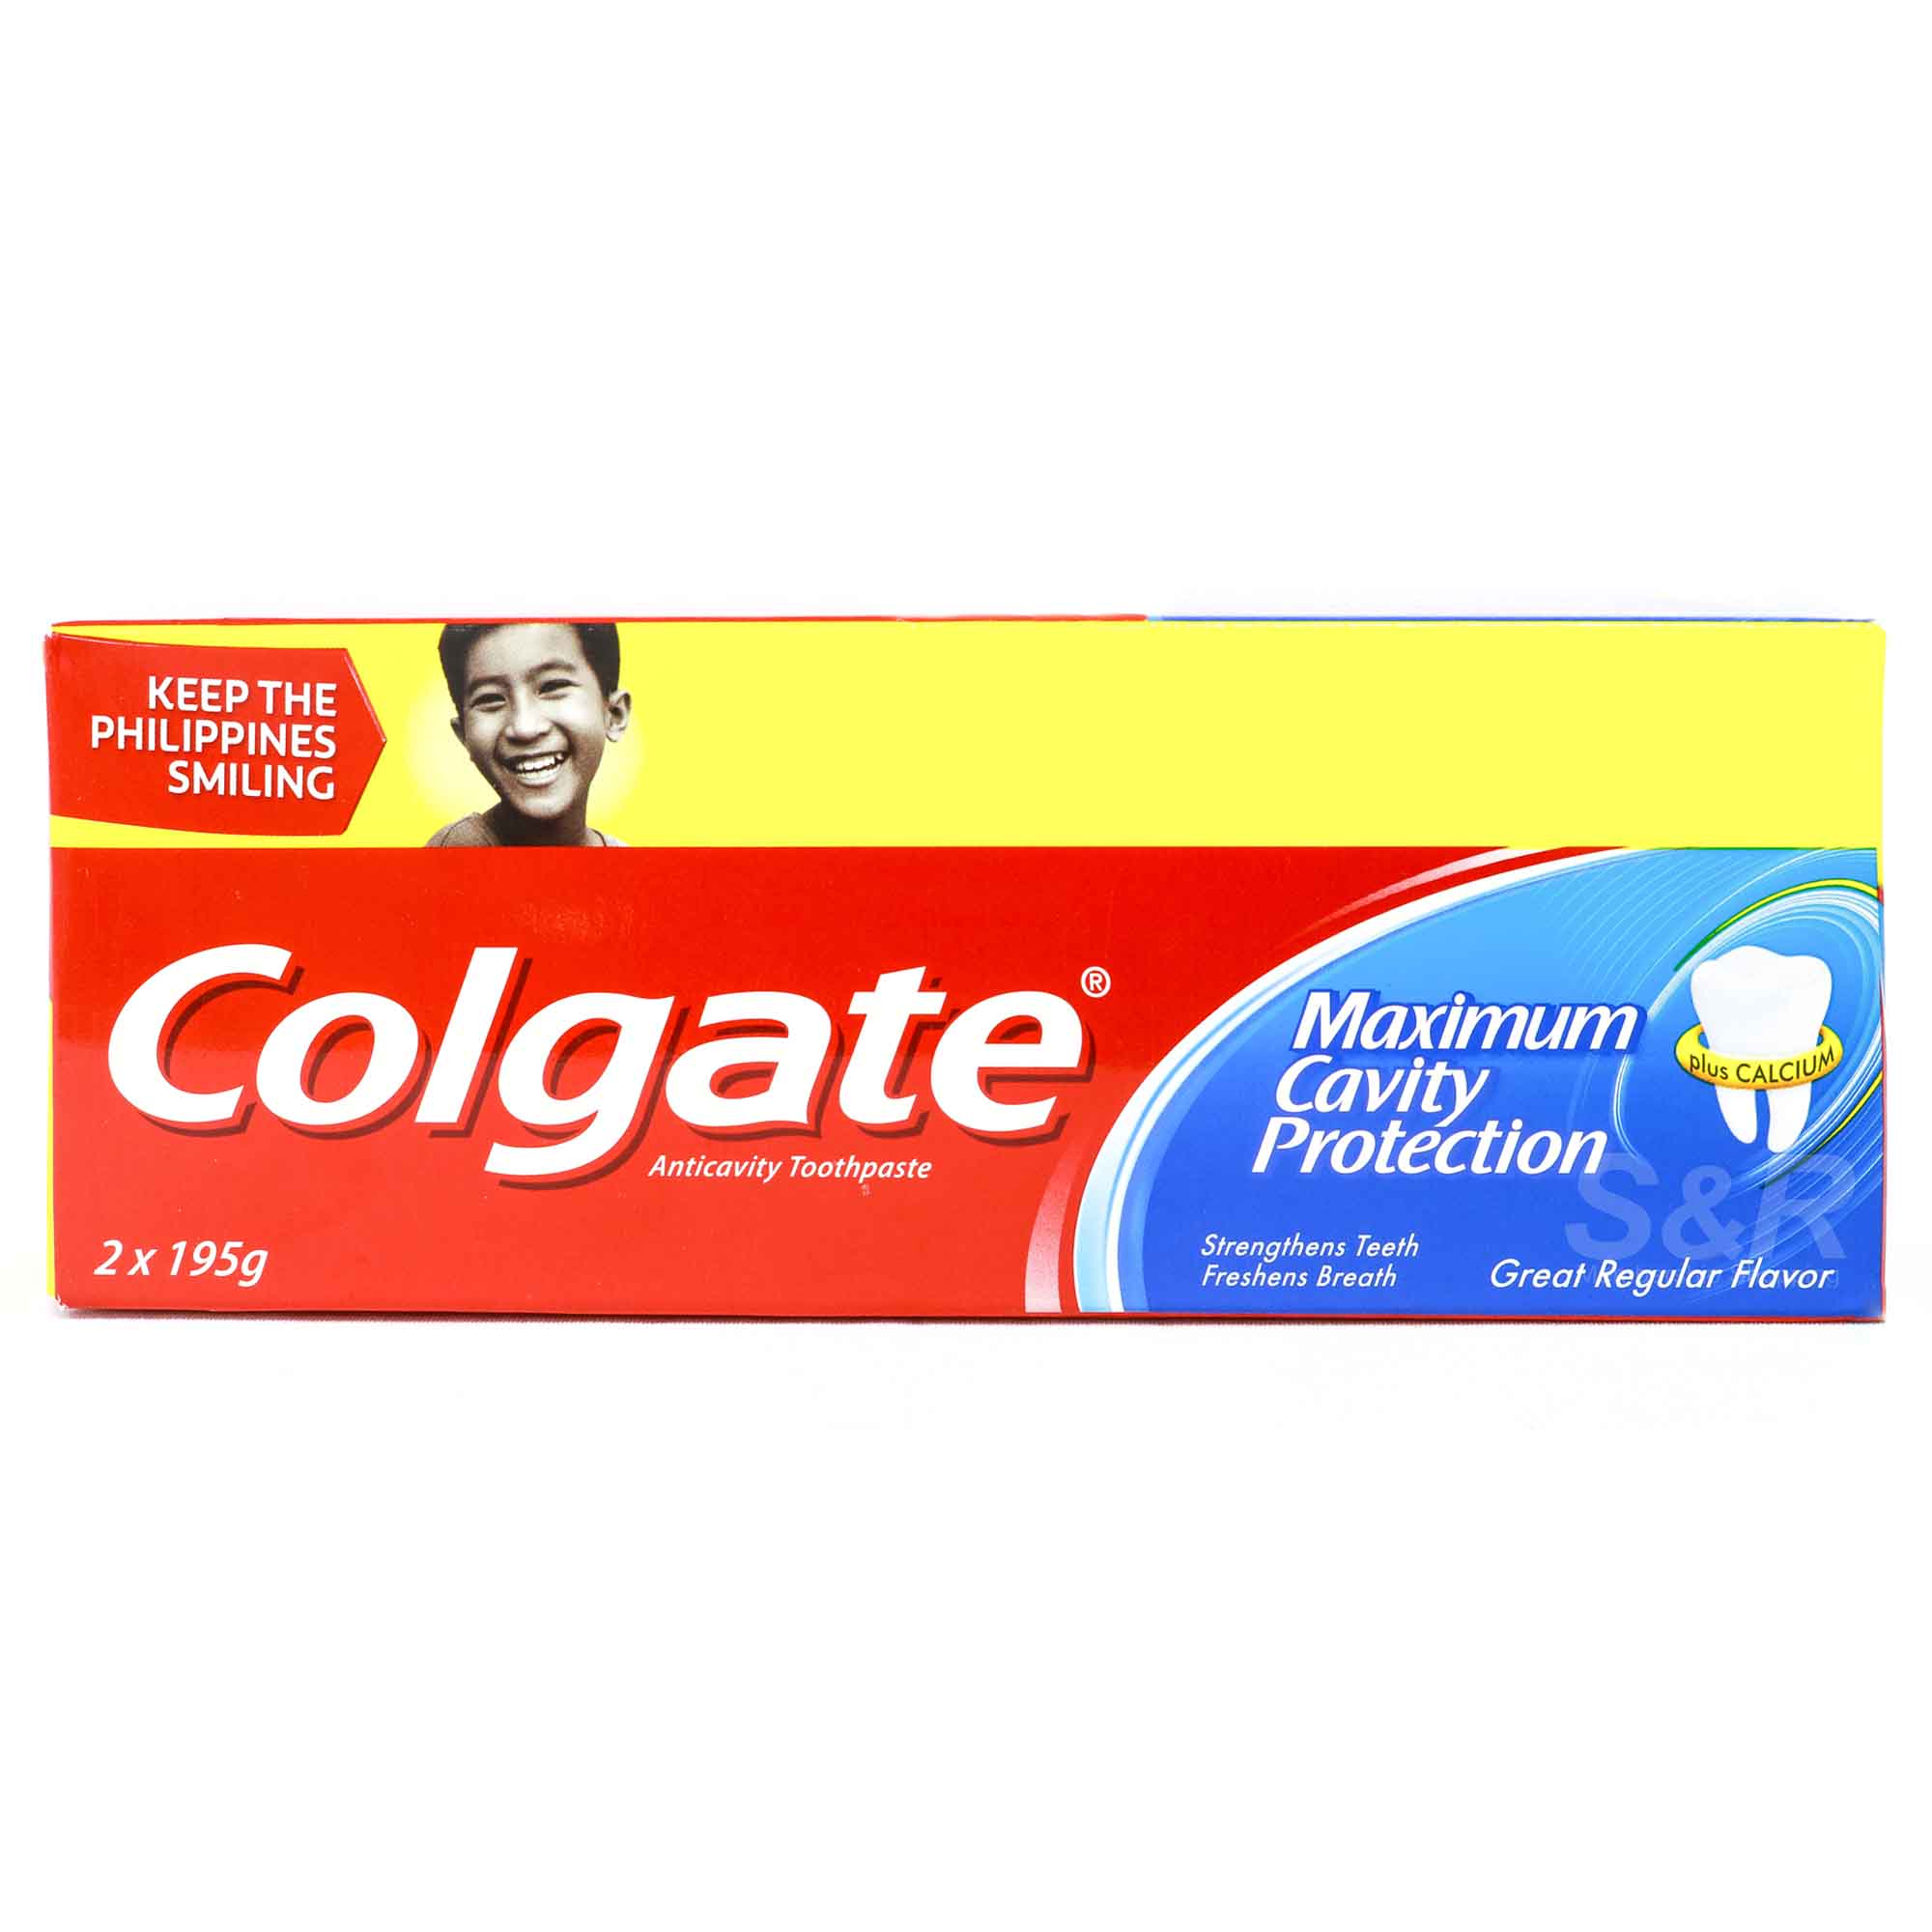 Colgate Cavity Protection Fluoride Toothpaste Twin Pack 2pcs